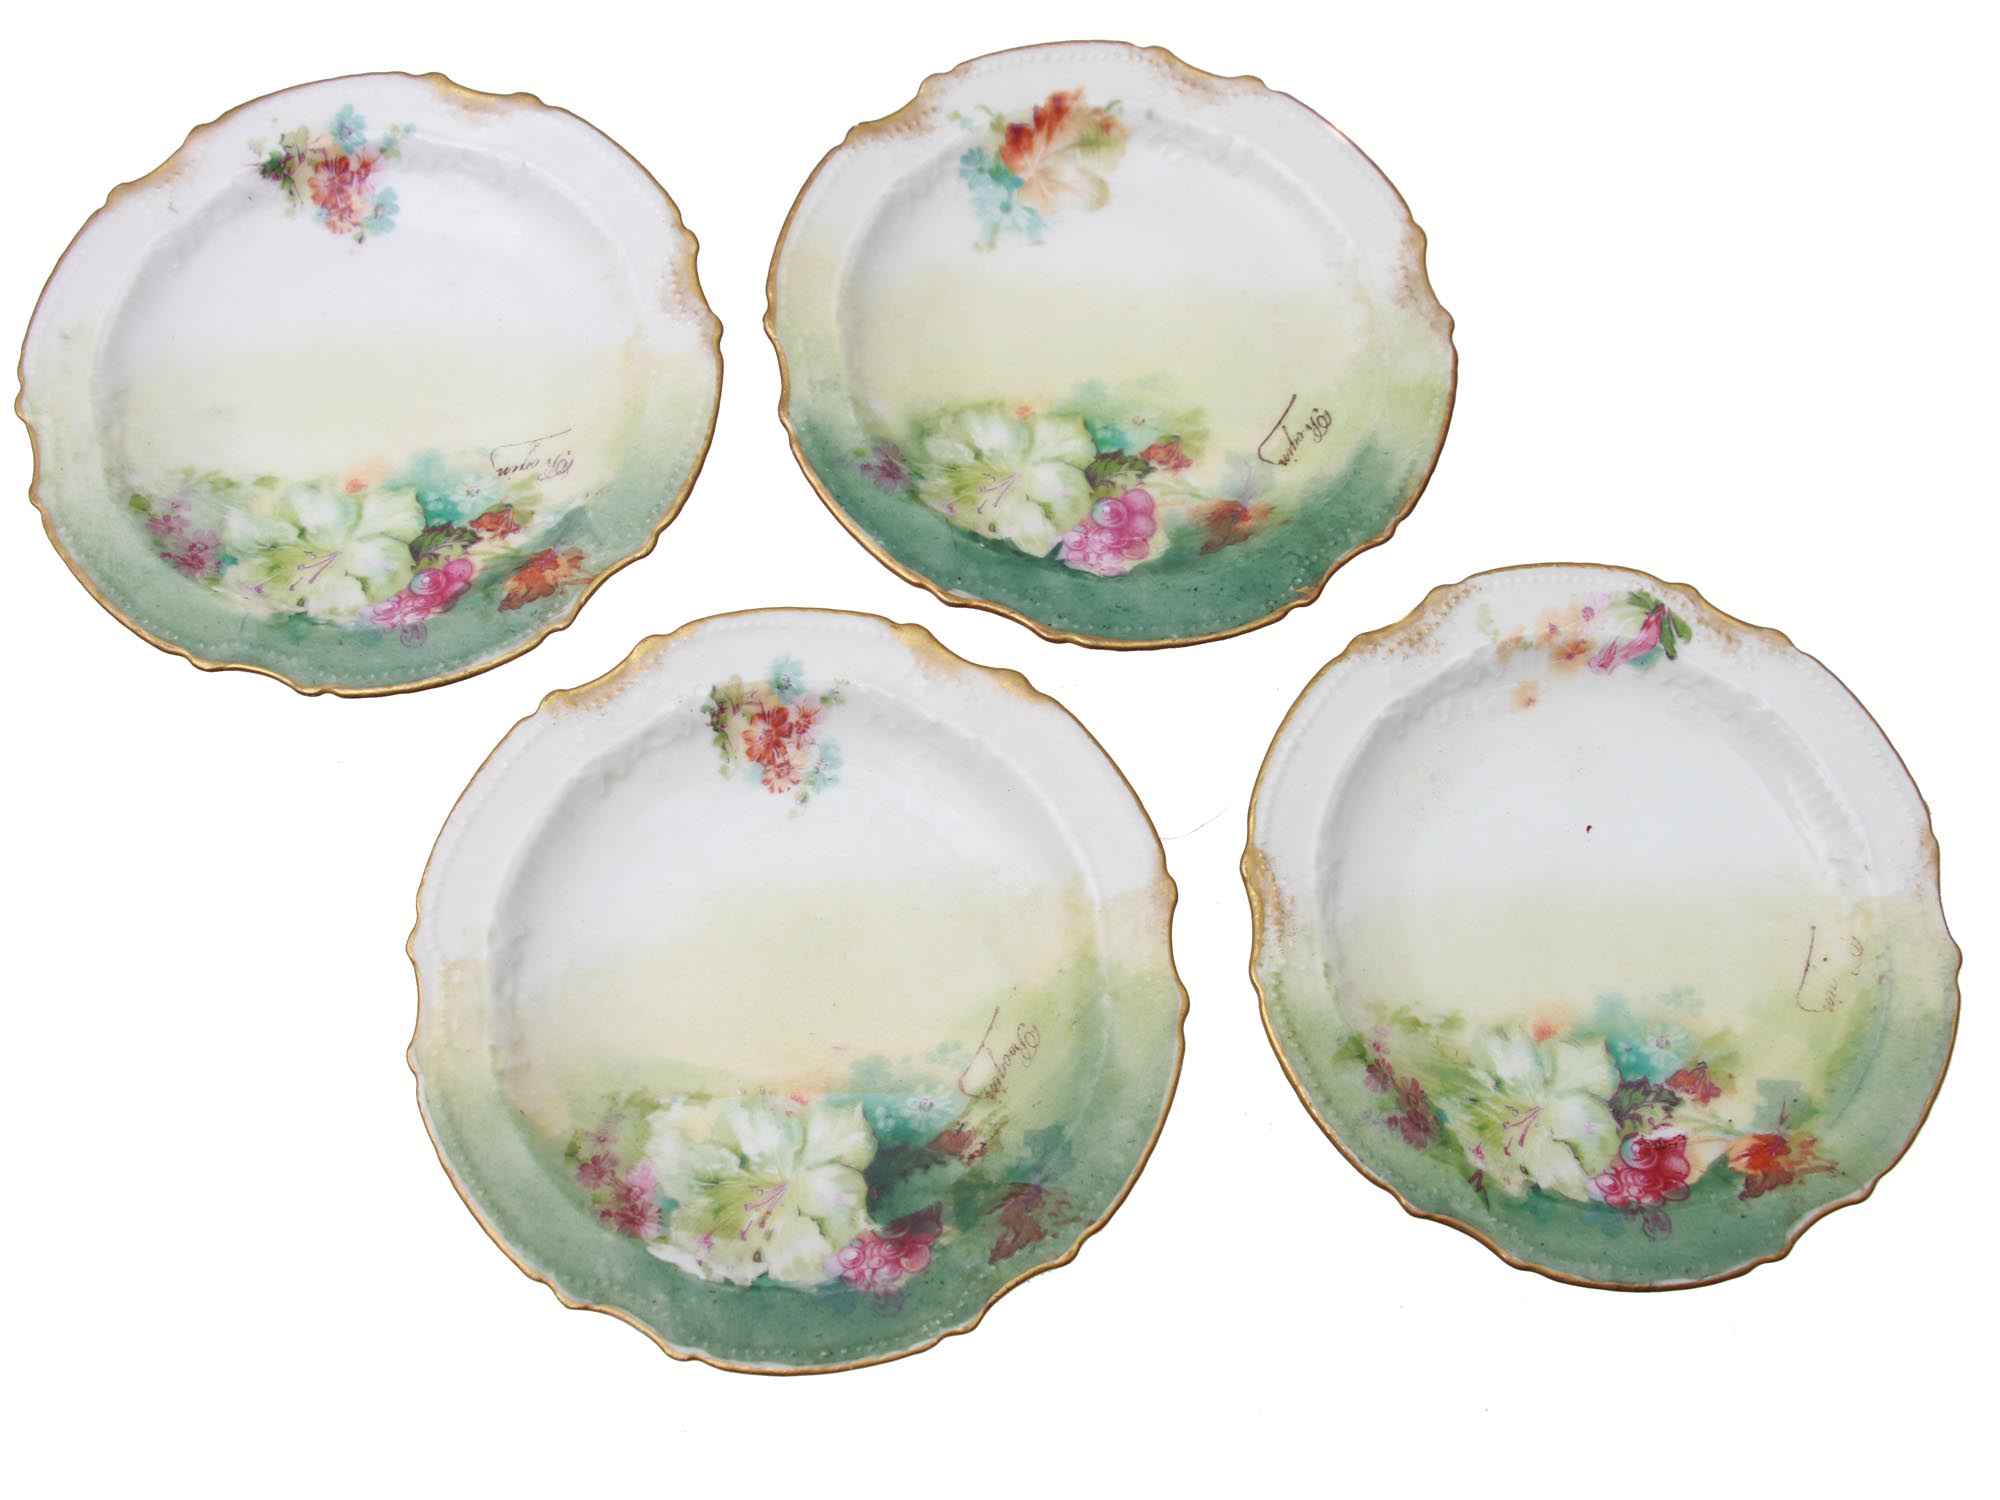 A FRENCH LIMOGES PORCELAIN FLORAL CHOCOLATE SET PIC-6